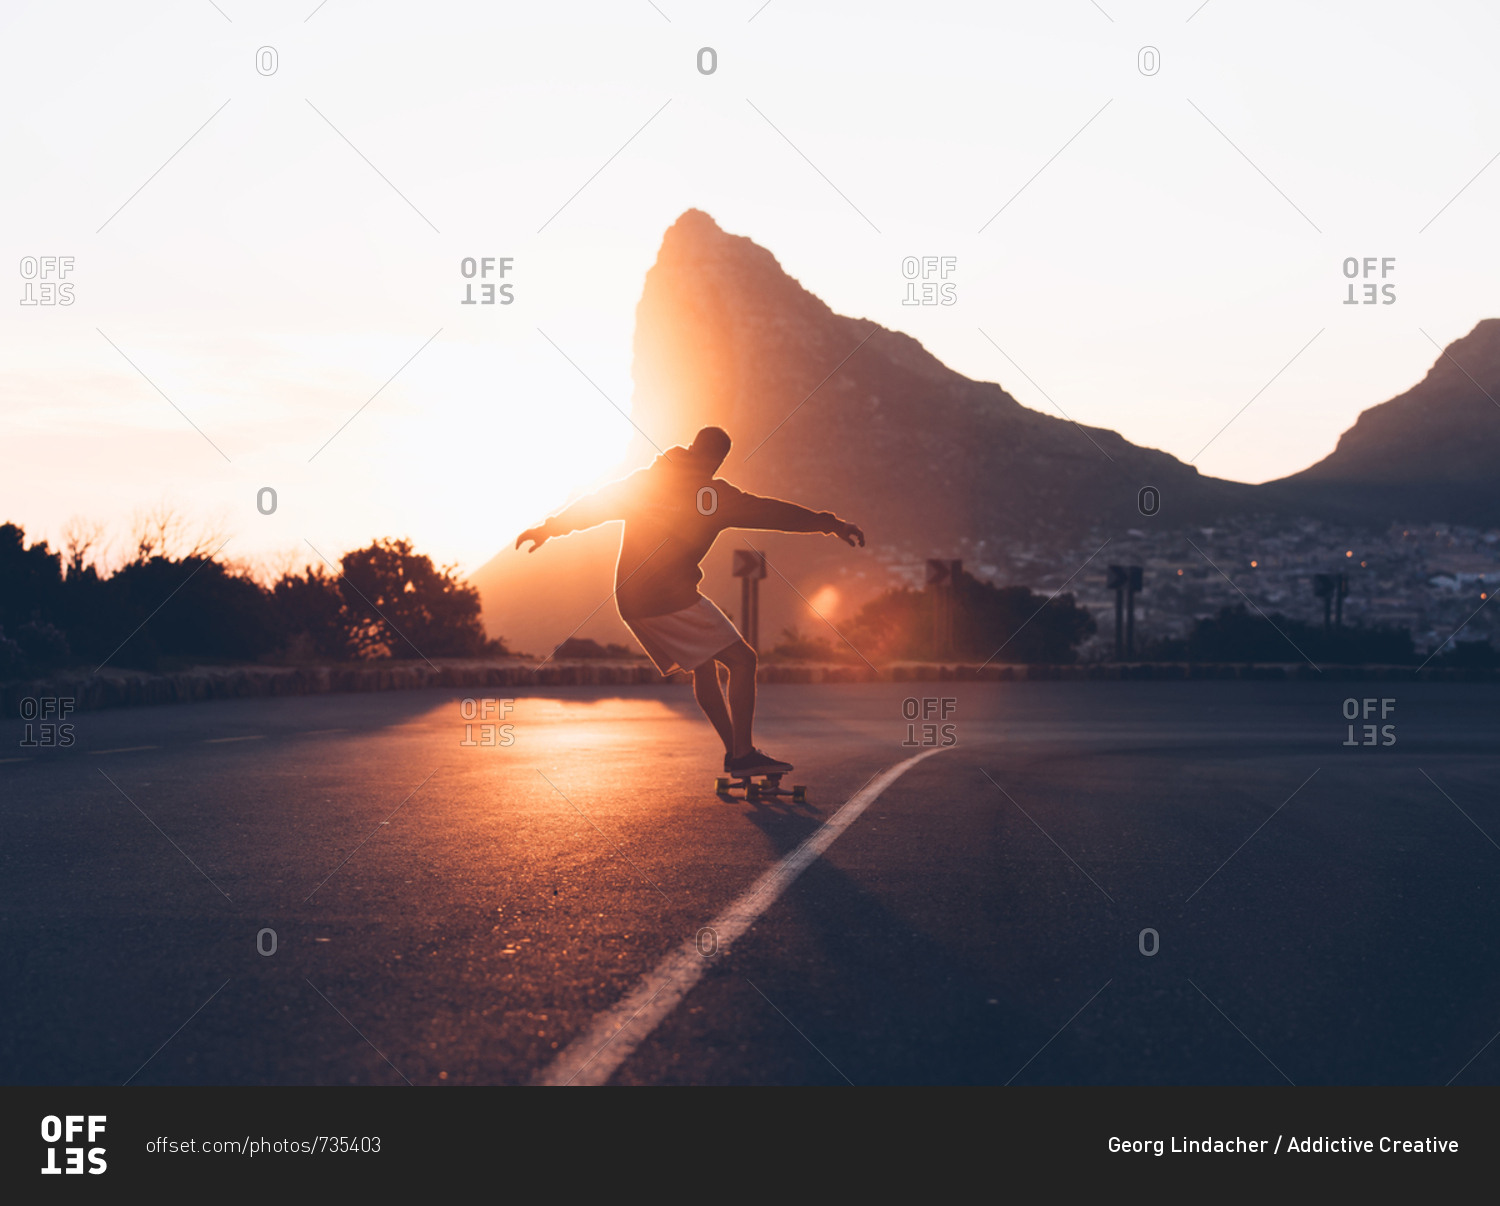 Back view of man riding on skateboard on asphalt road down the hill in backlit.